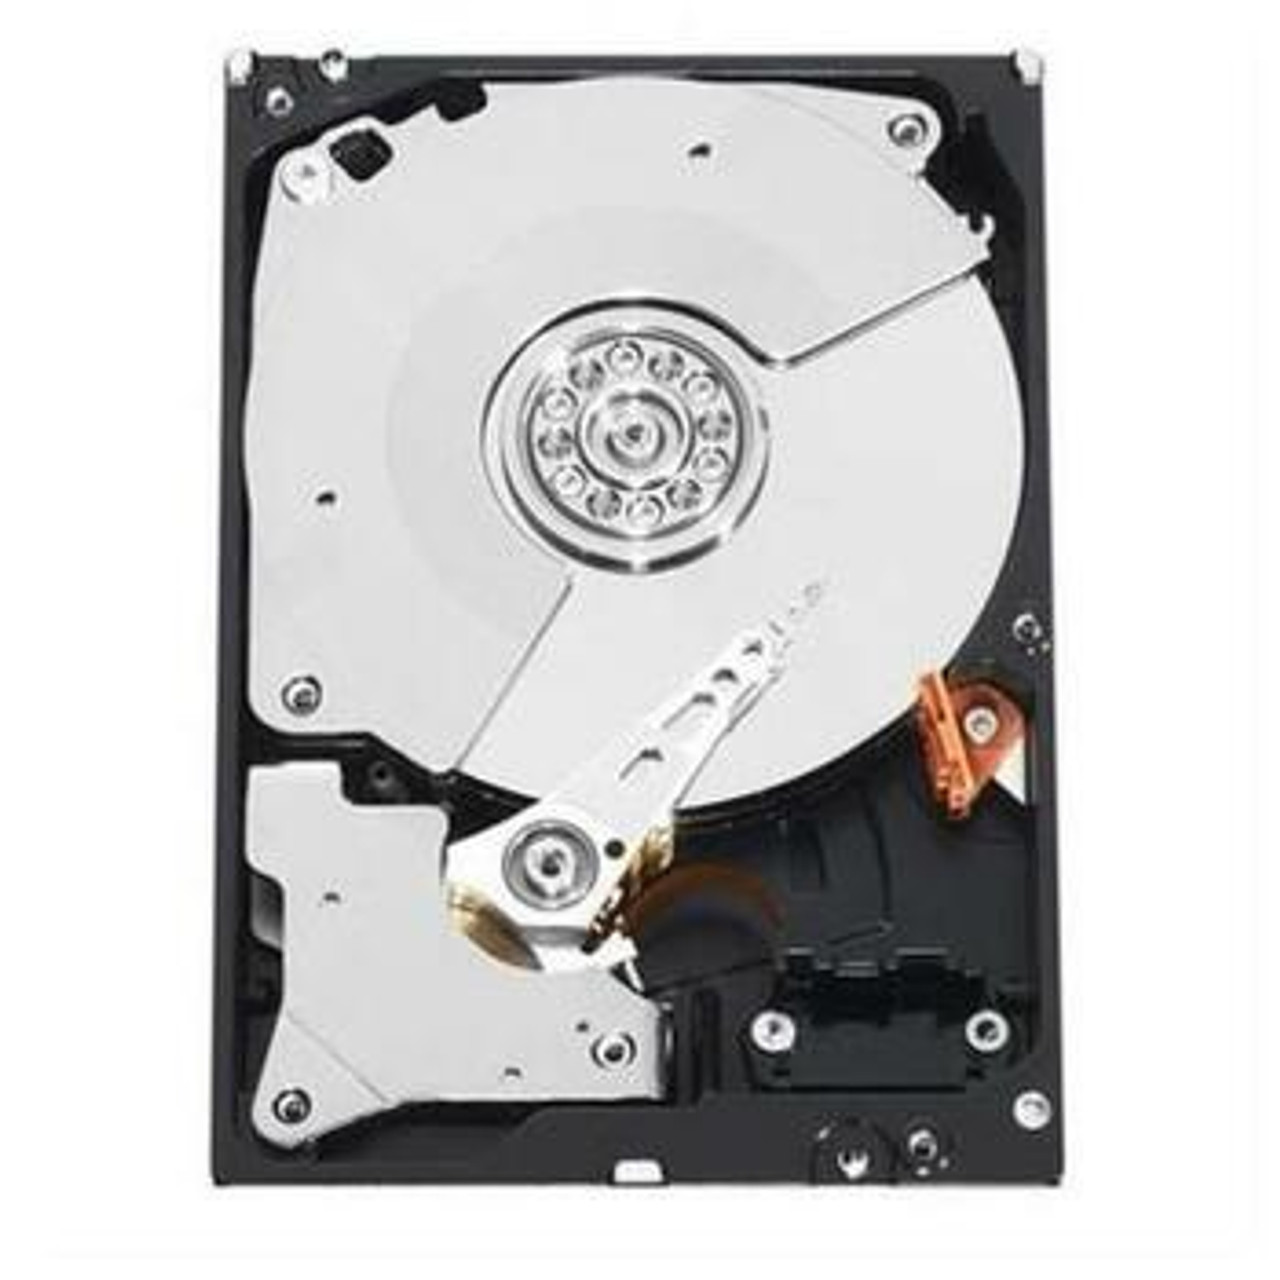 0C1544 Dell 320GB 5400RPM Fibre Channel Internal Hard Drive with Tray for CX Series